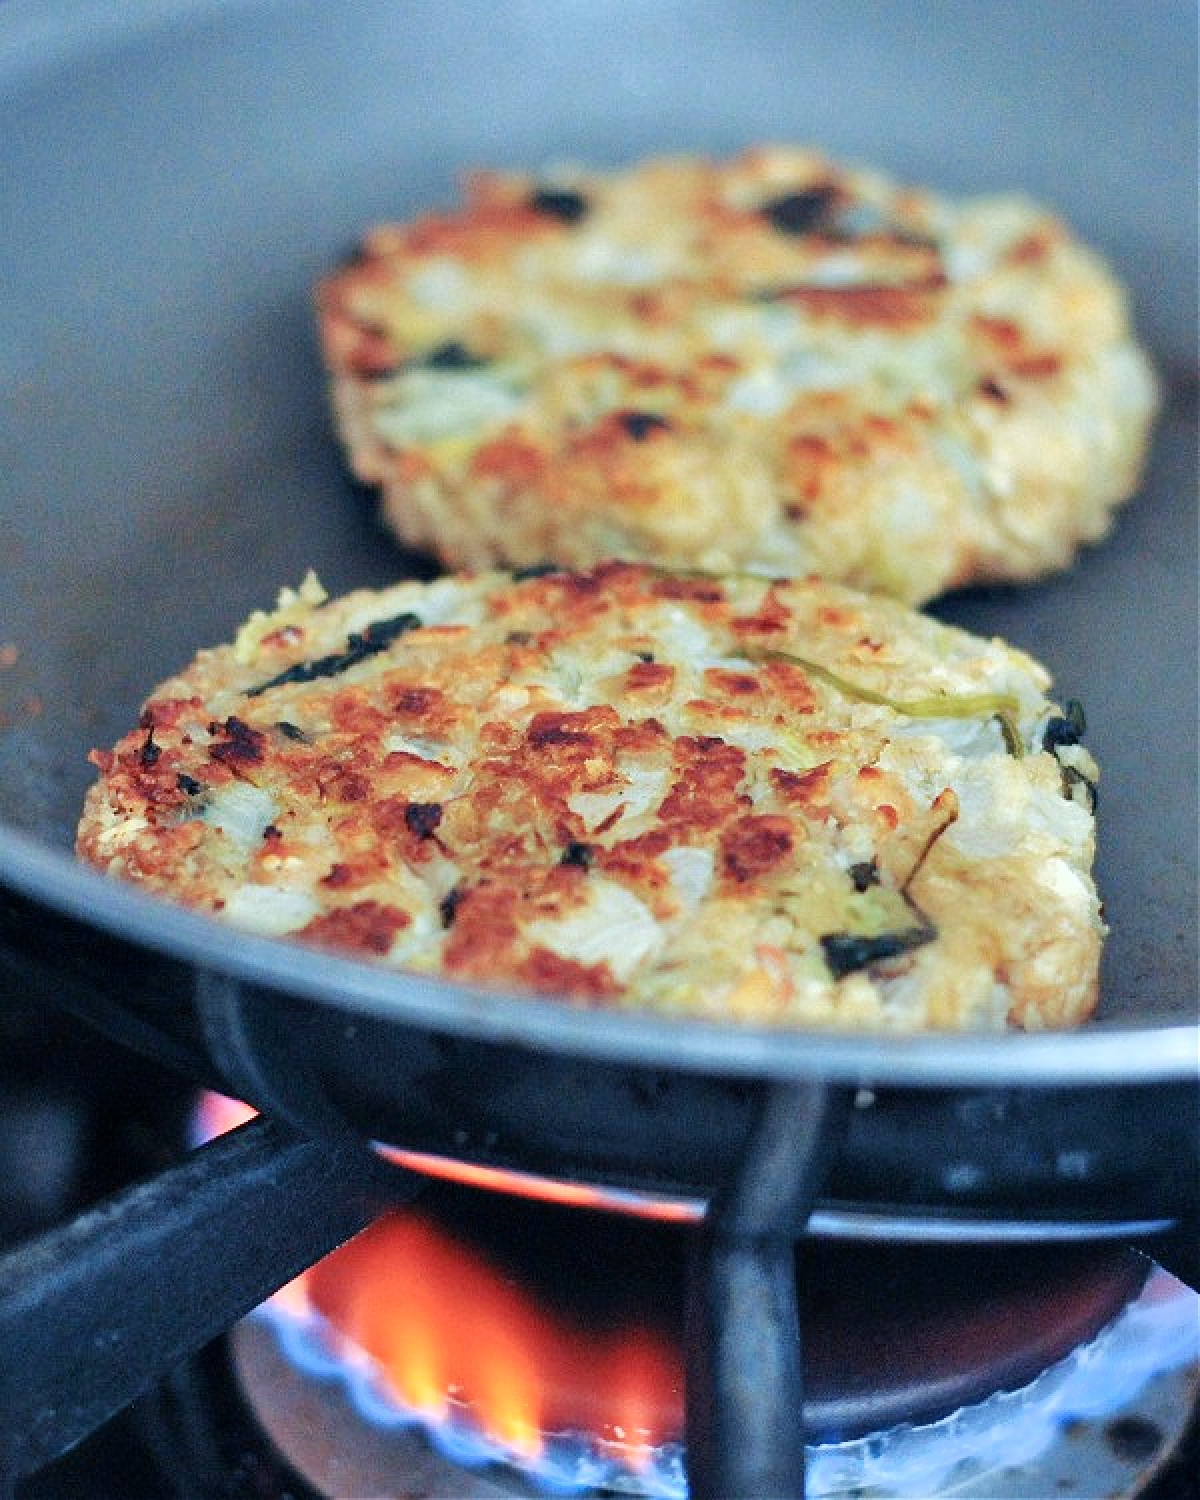 Two spinach artichoke burger patties sit cooking in a skillet over a gas fire cooktop.